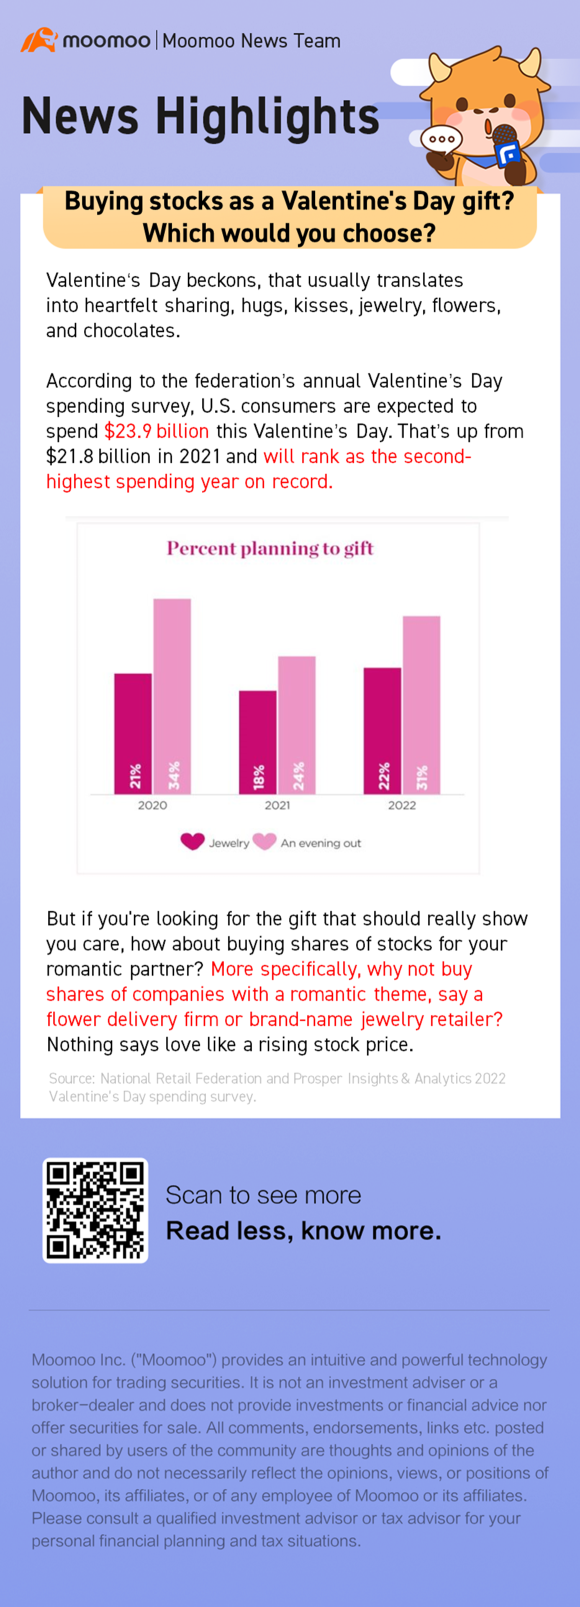 Buying stocks as a Valentine's Day gift?